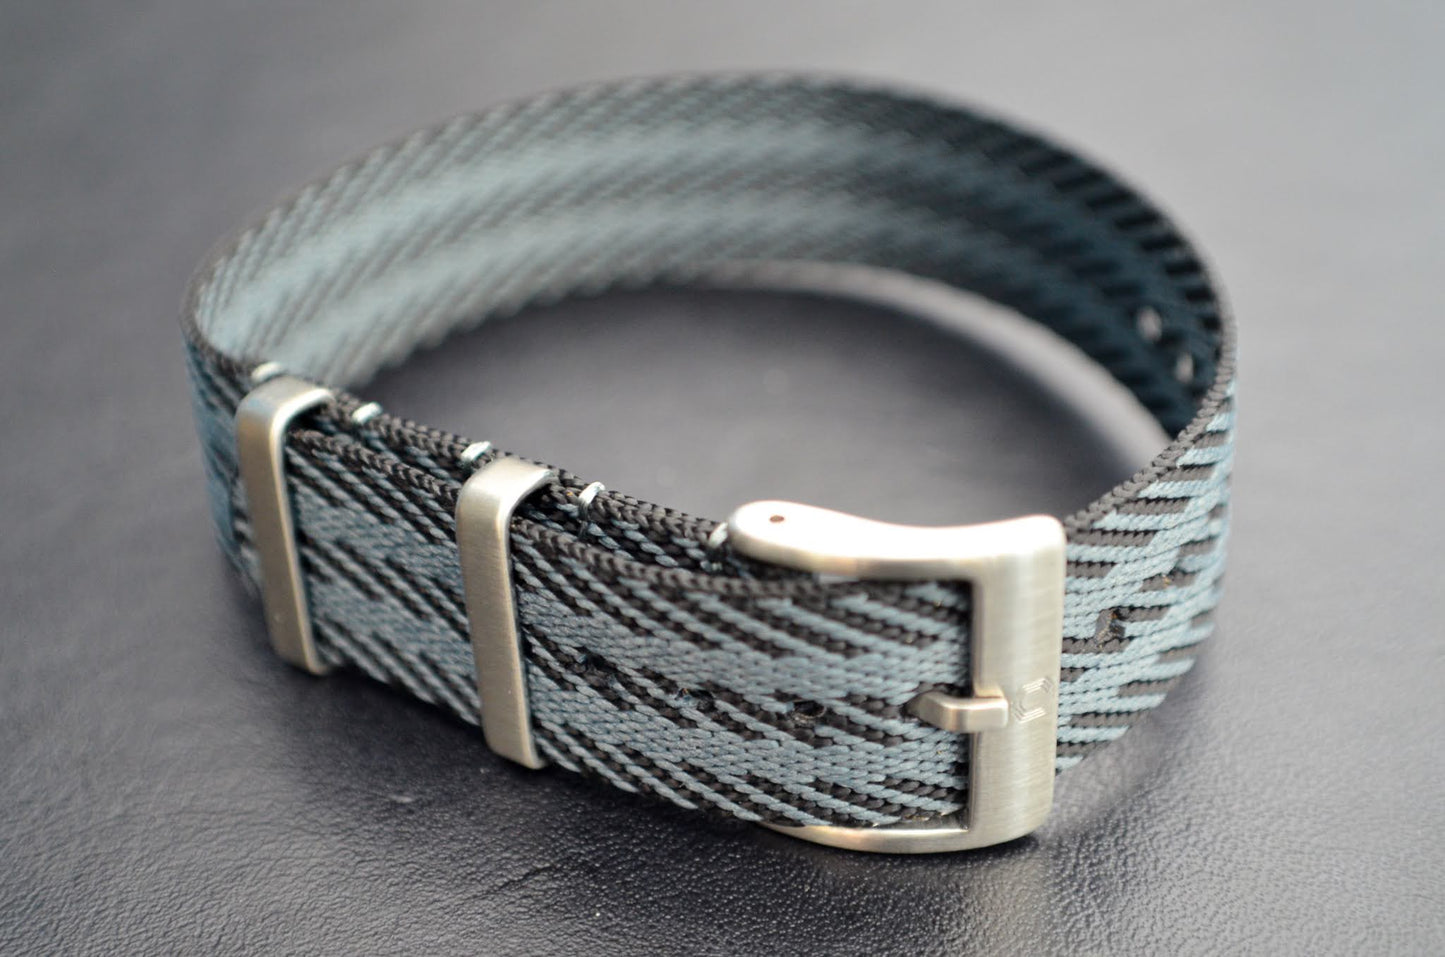 The 'Roger' - Single pass 'Bond' watch strap made of a soft weaved nylon